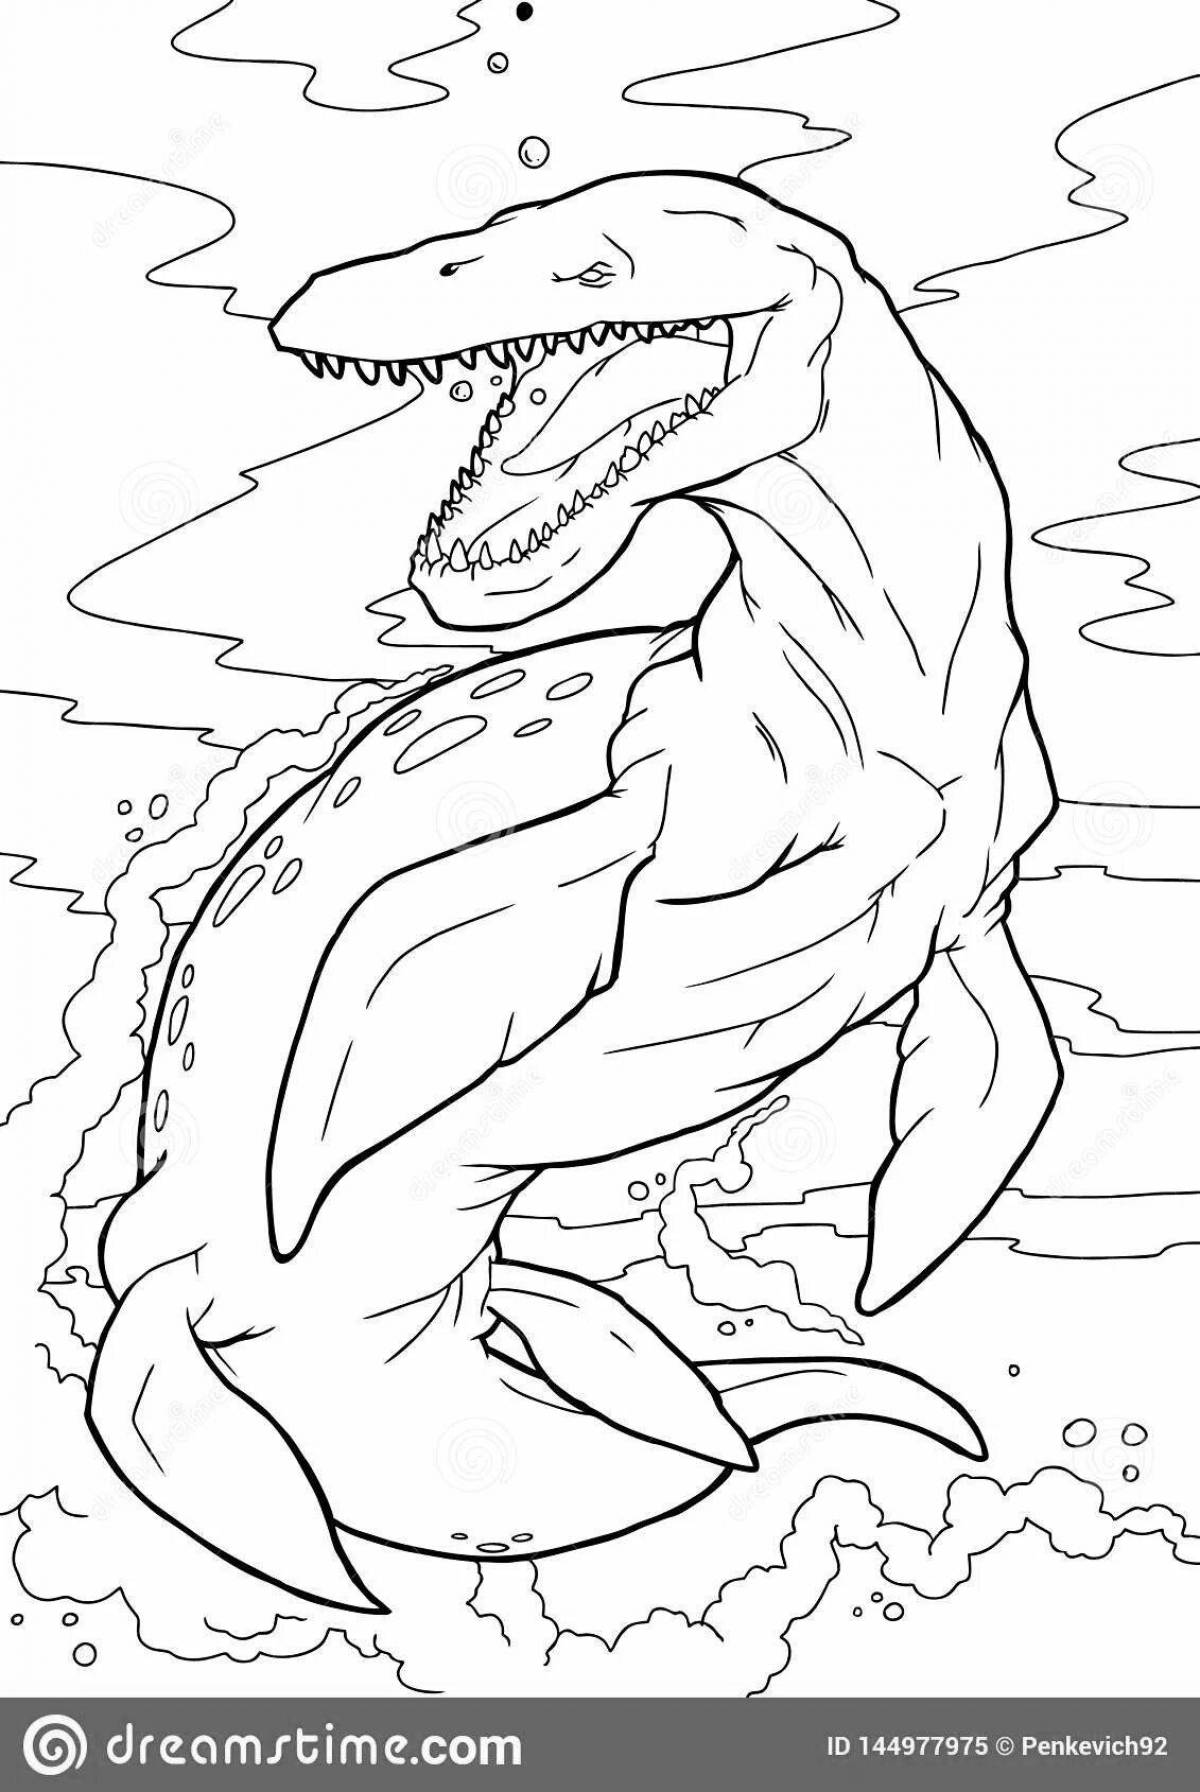 Awesome liopleurodon coloring book